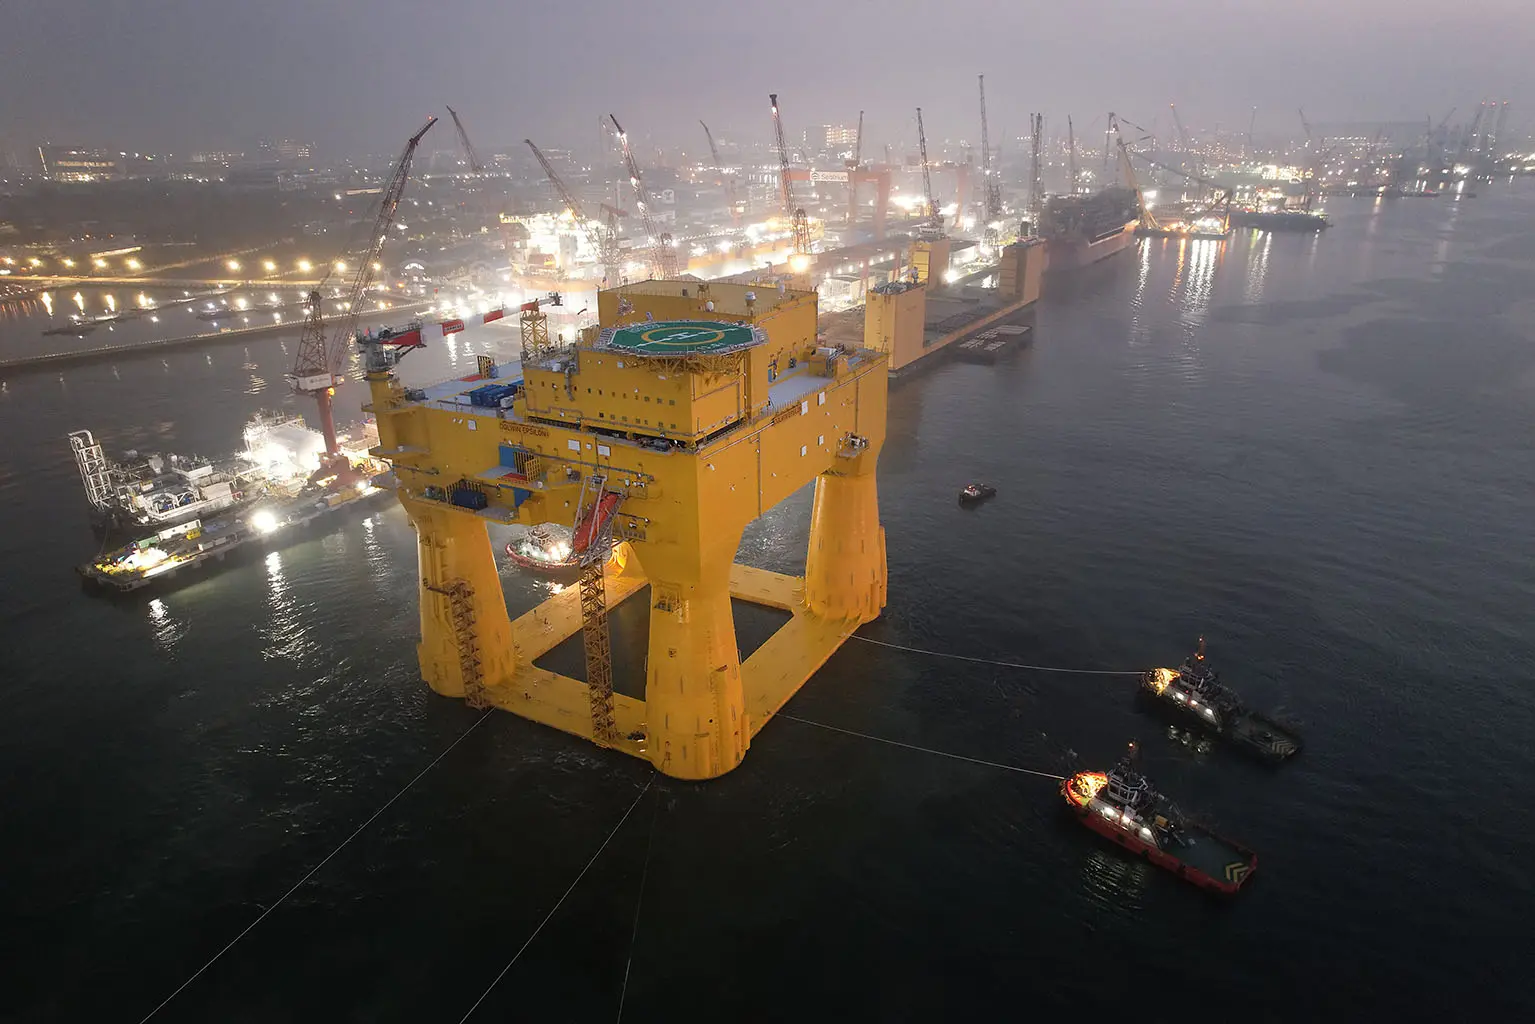 Mighty Servant 1 brings DolWin epsilon offshore platform to Norway TenneT